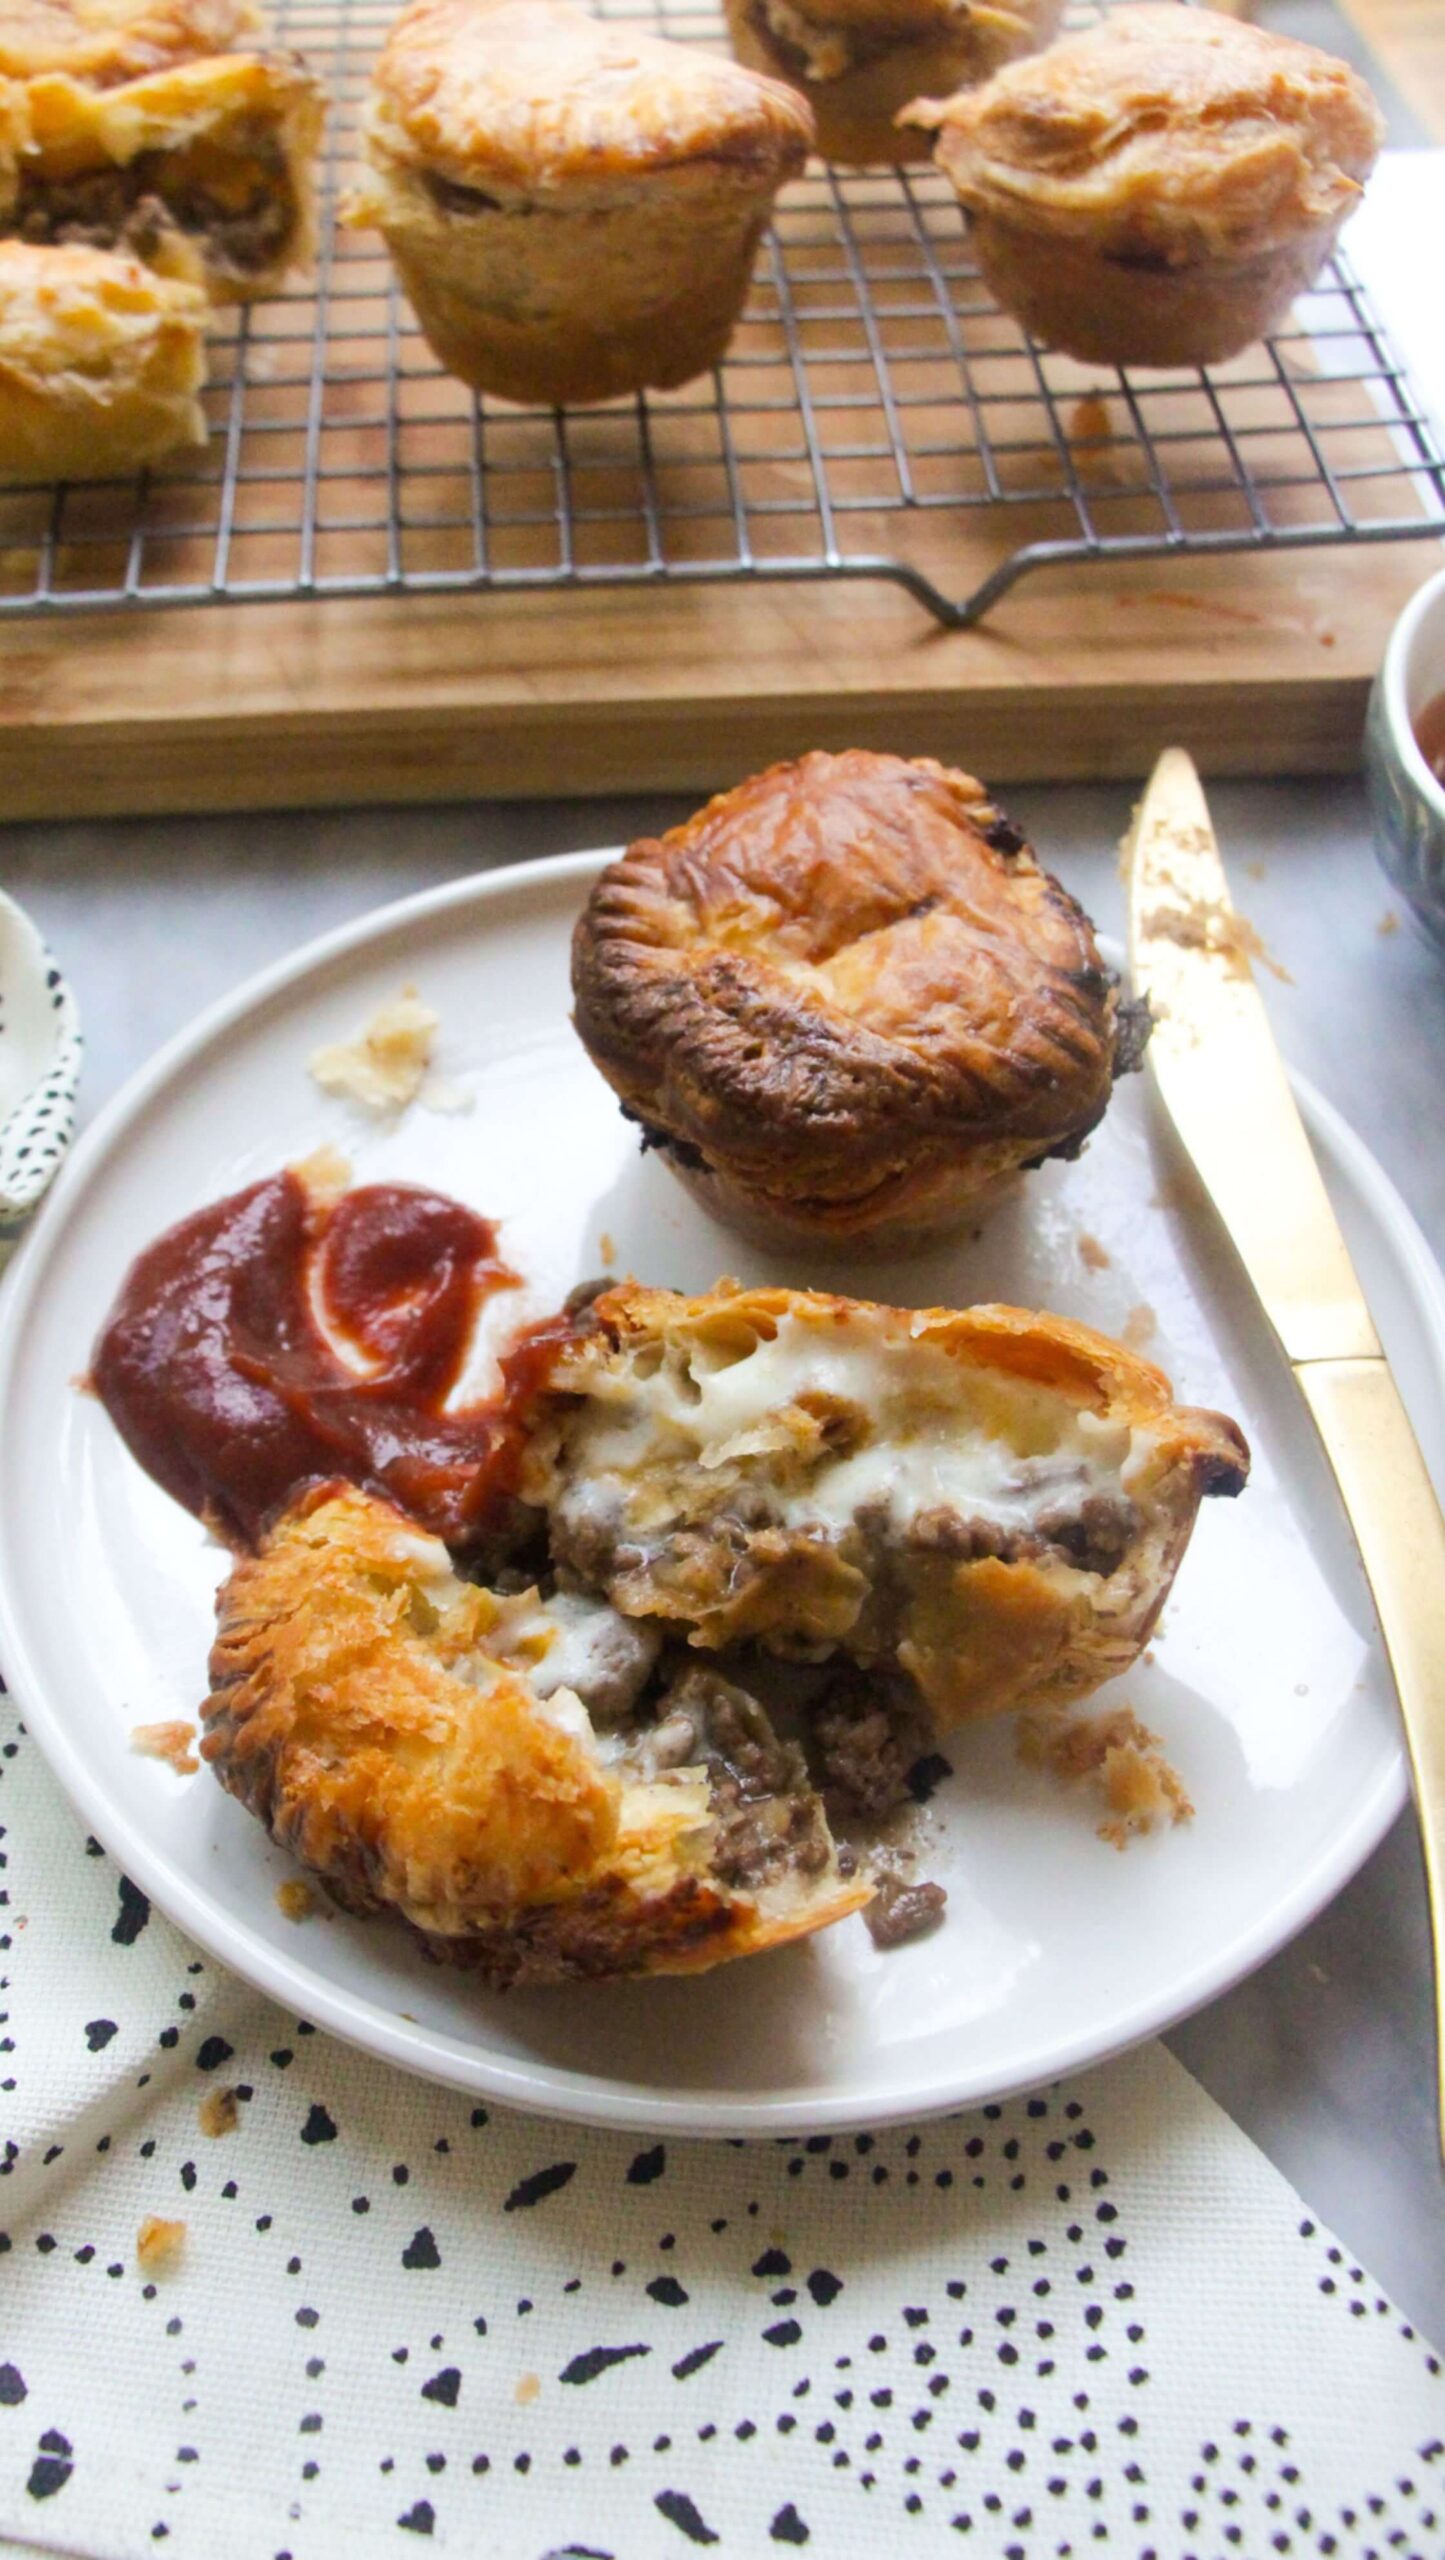 One cut open mince and cheese pie on a plate with beef and cheese filling oozing out, with tomato sauce on the side and another small mince and cheese pie on the plate behind it.